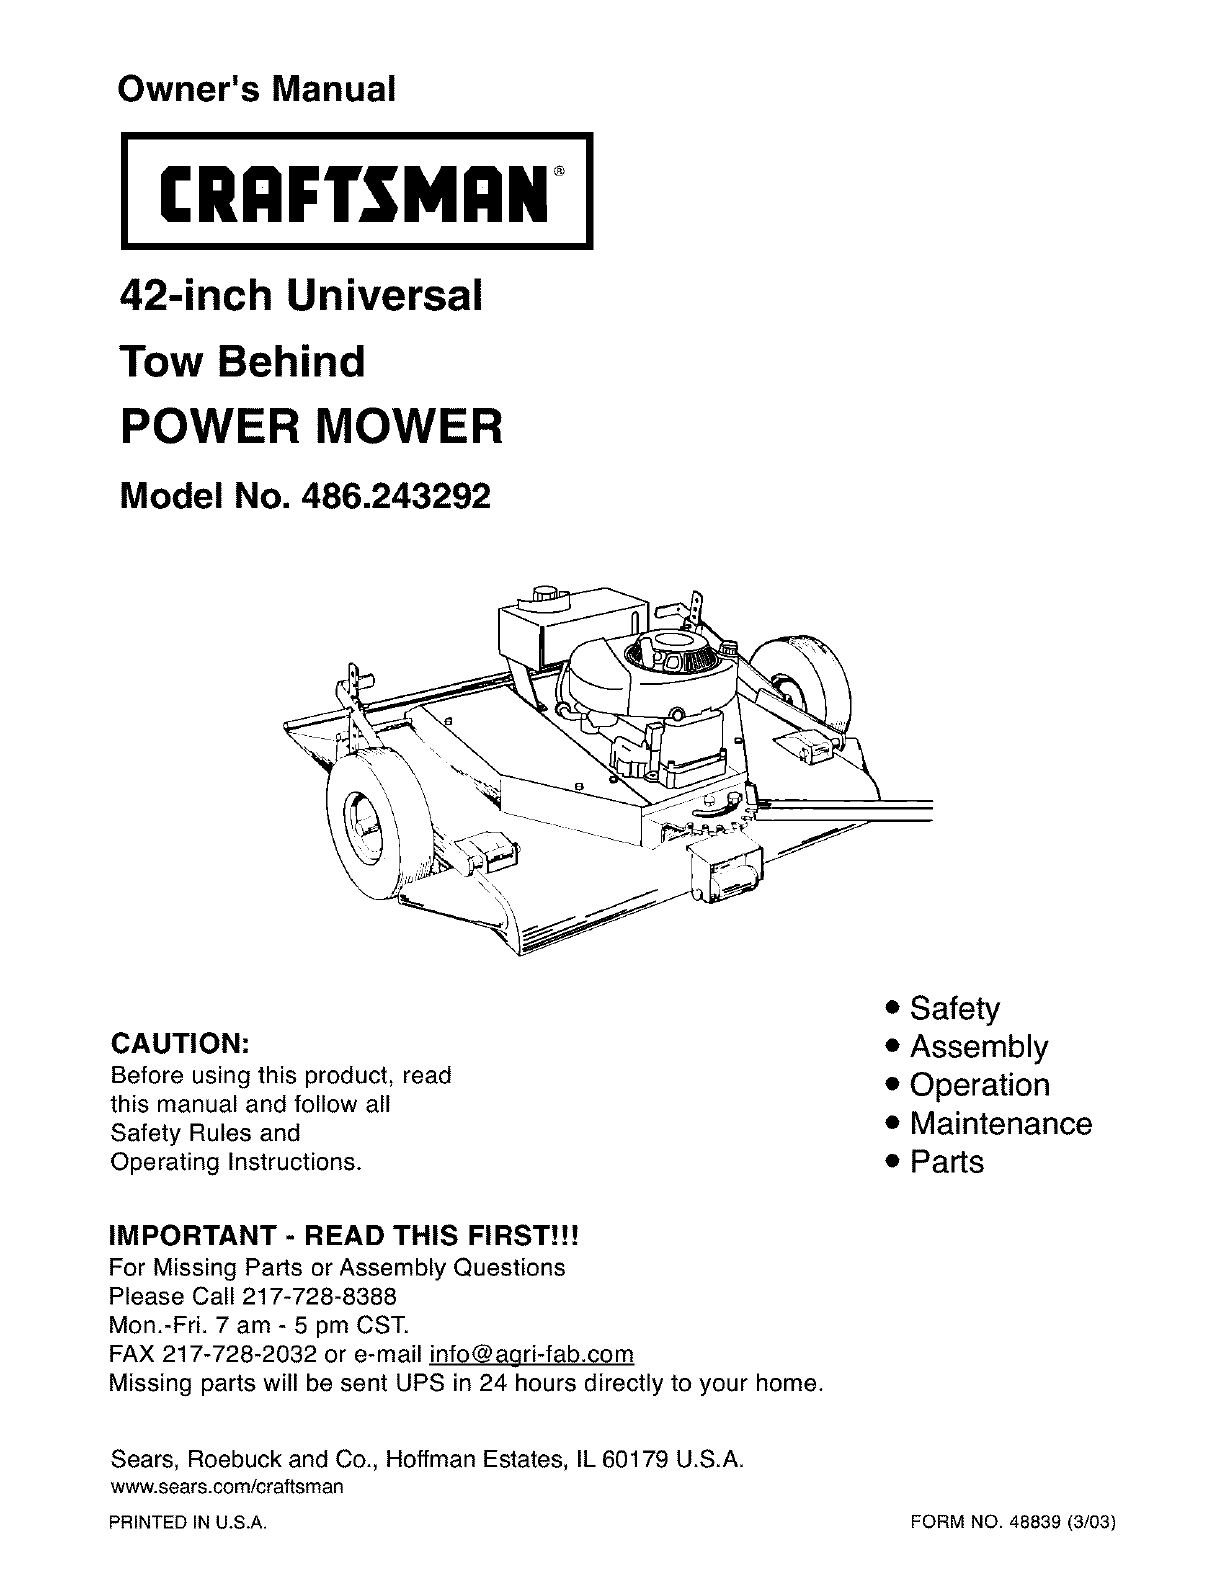 Craftsman 486243292 User Manual TOW BEHIND POWER MOWER Manuals And ...